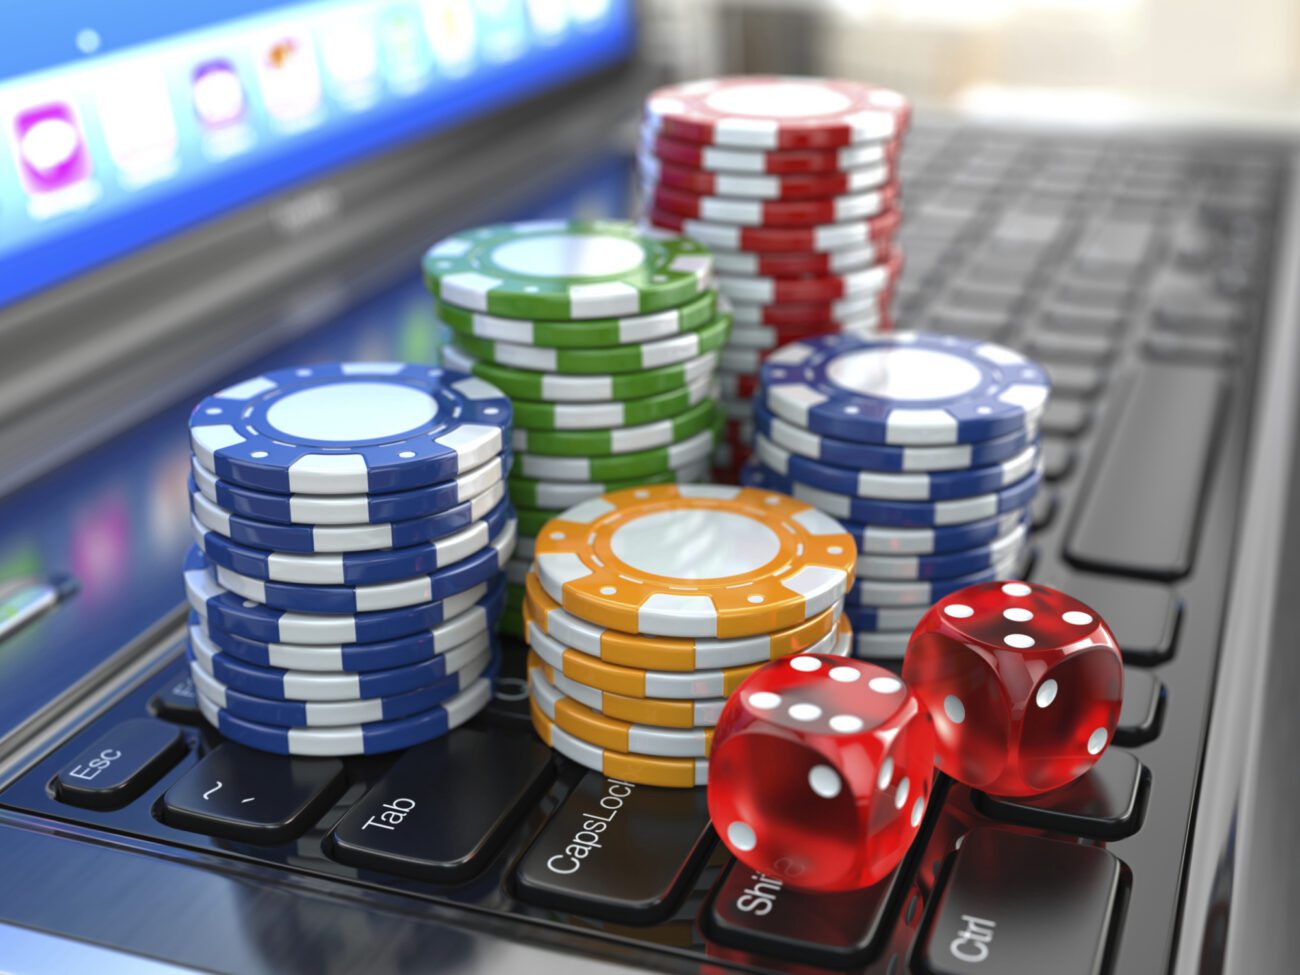 Online casino games have become very popular, with millions of people playing on different sites. Here's our comprehensive guide.